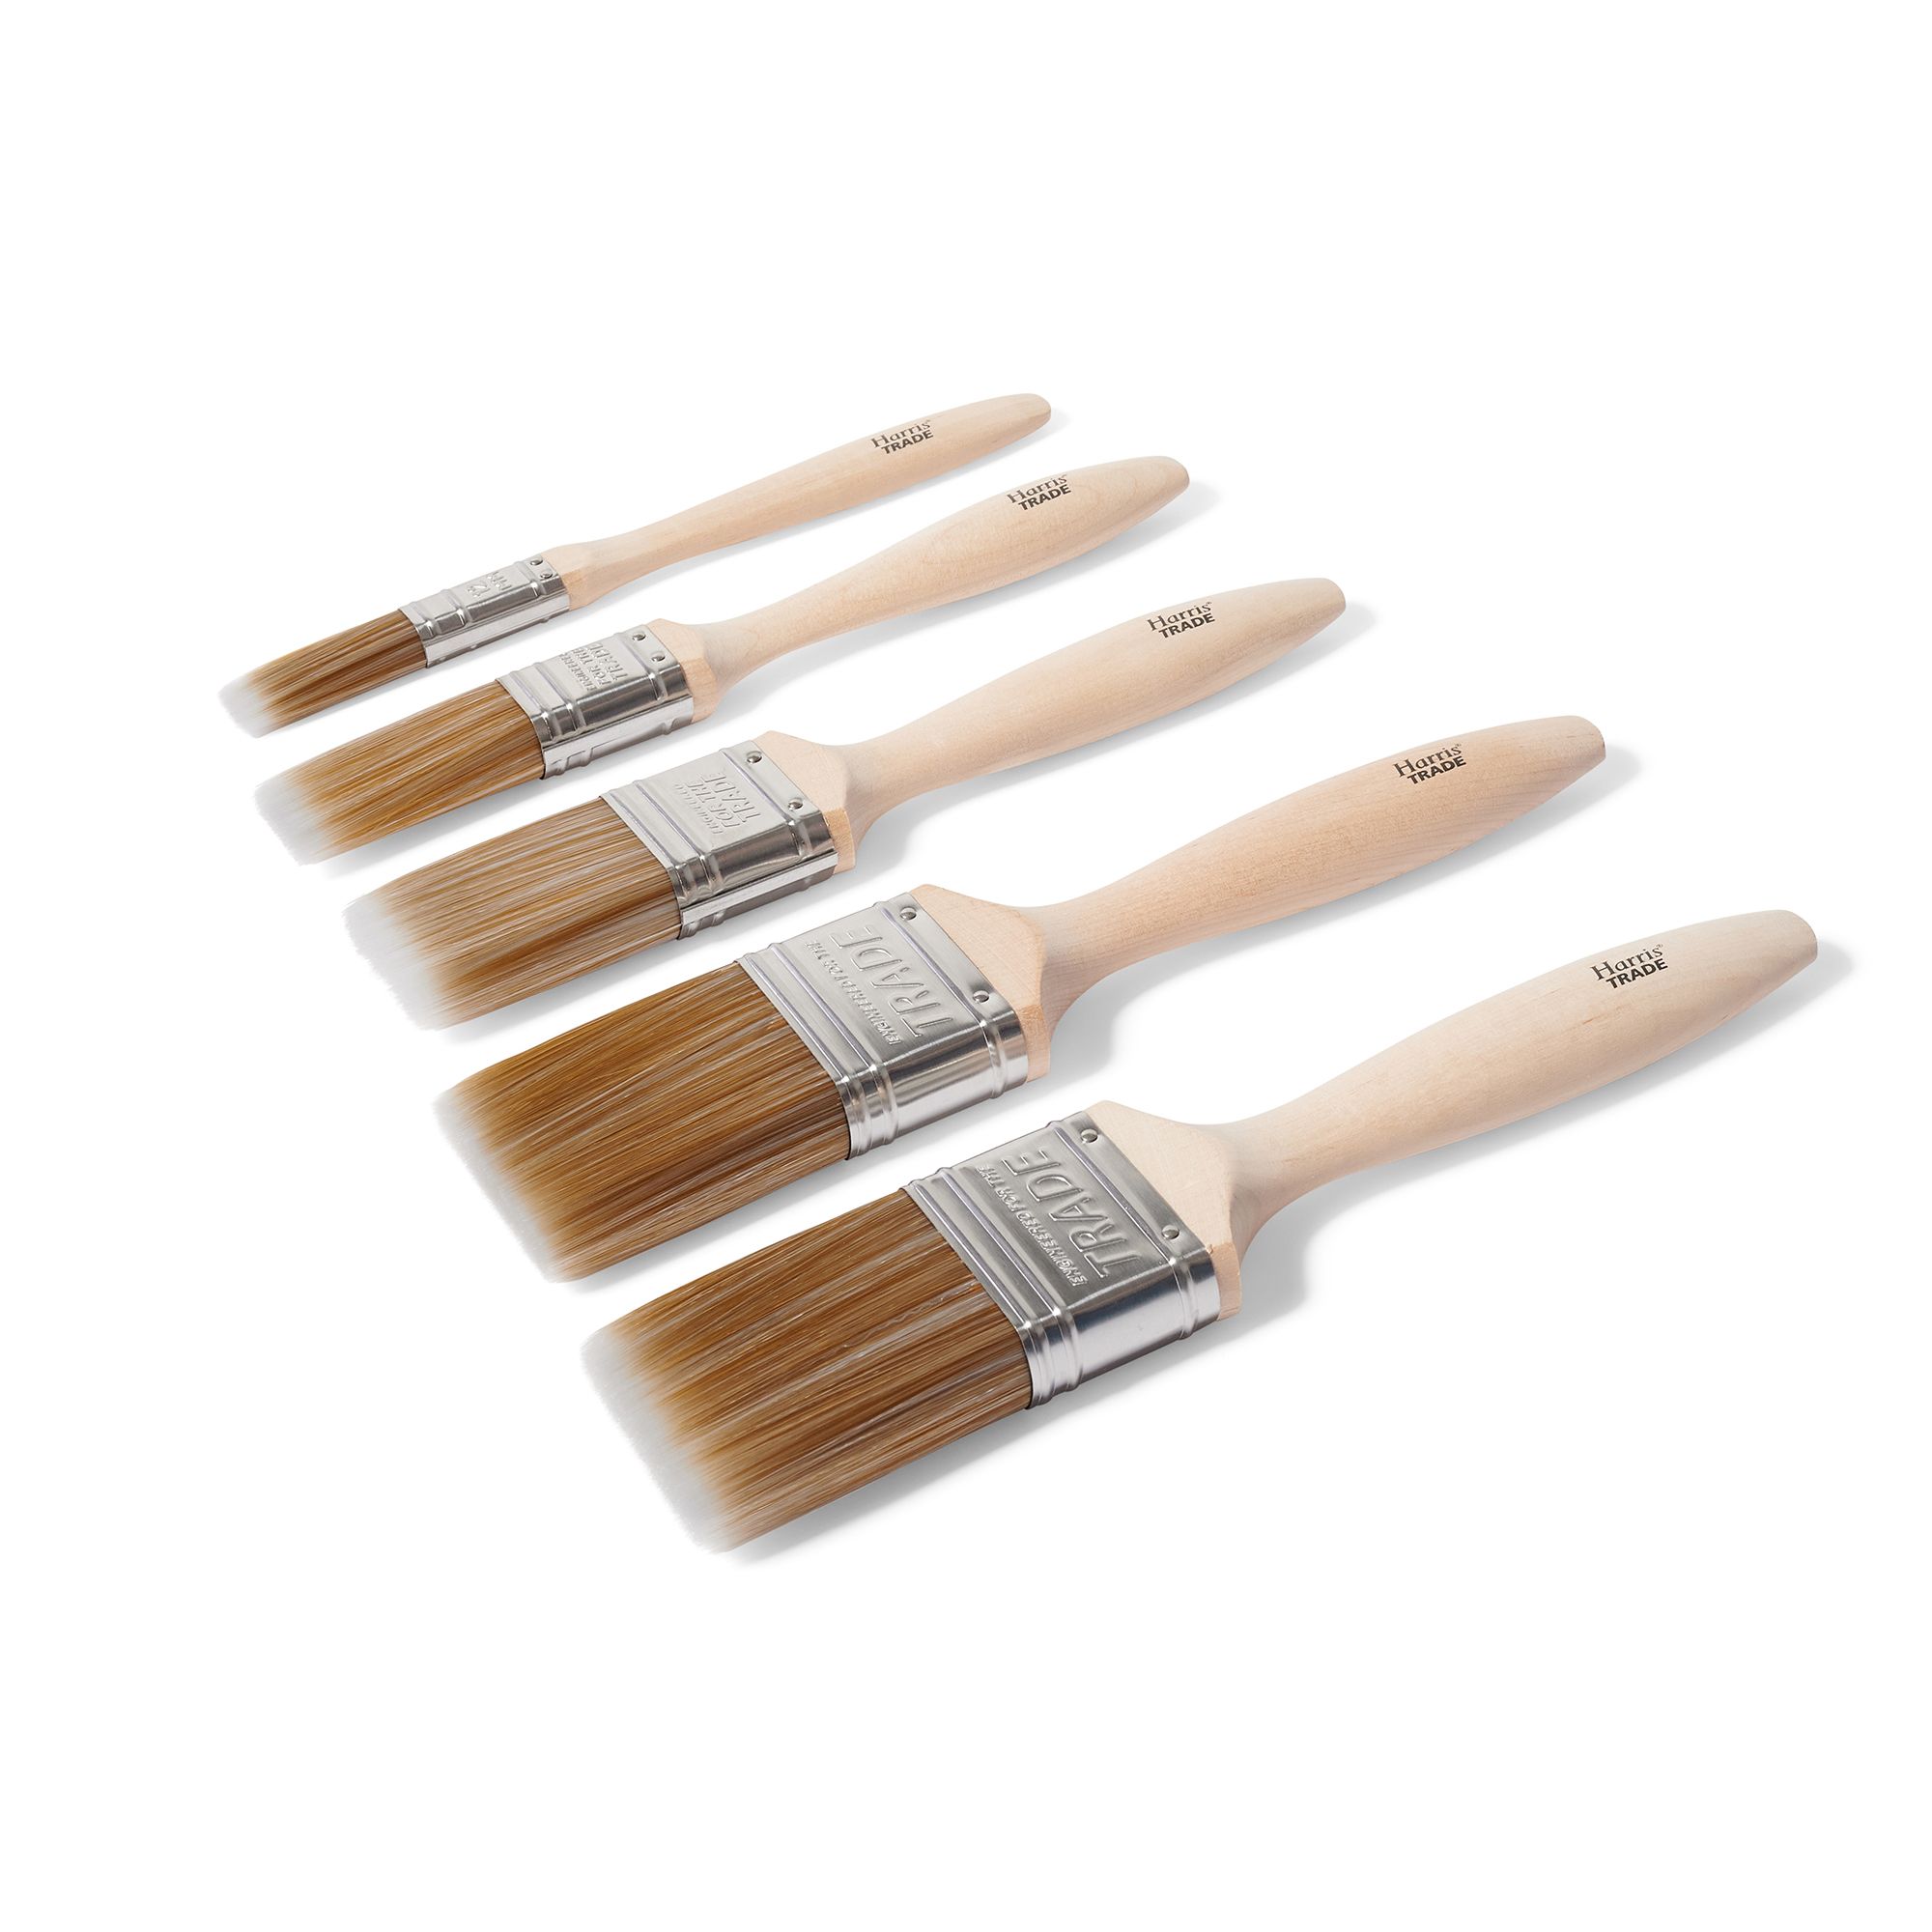 20 Pack of Assorted Size Paint and Chip Paint Brushes for Paint, Stains,  Varnishes, and Glues, Brush Set - 20 Pack - Harris Teeter